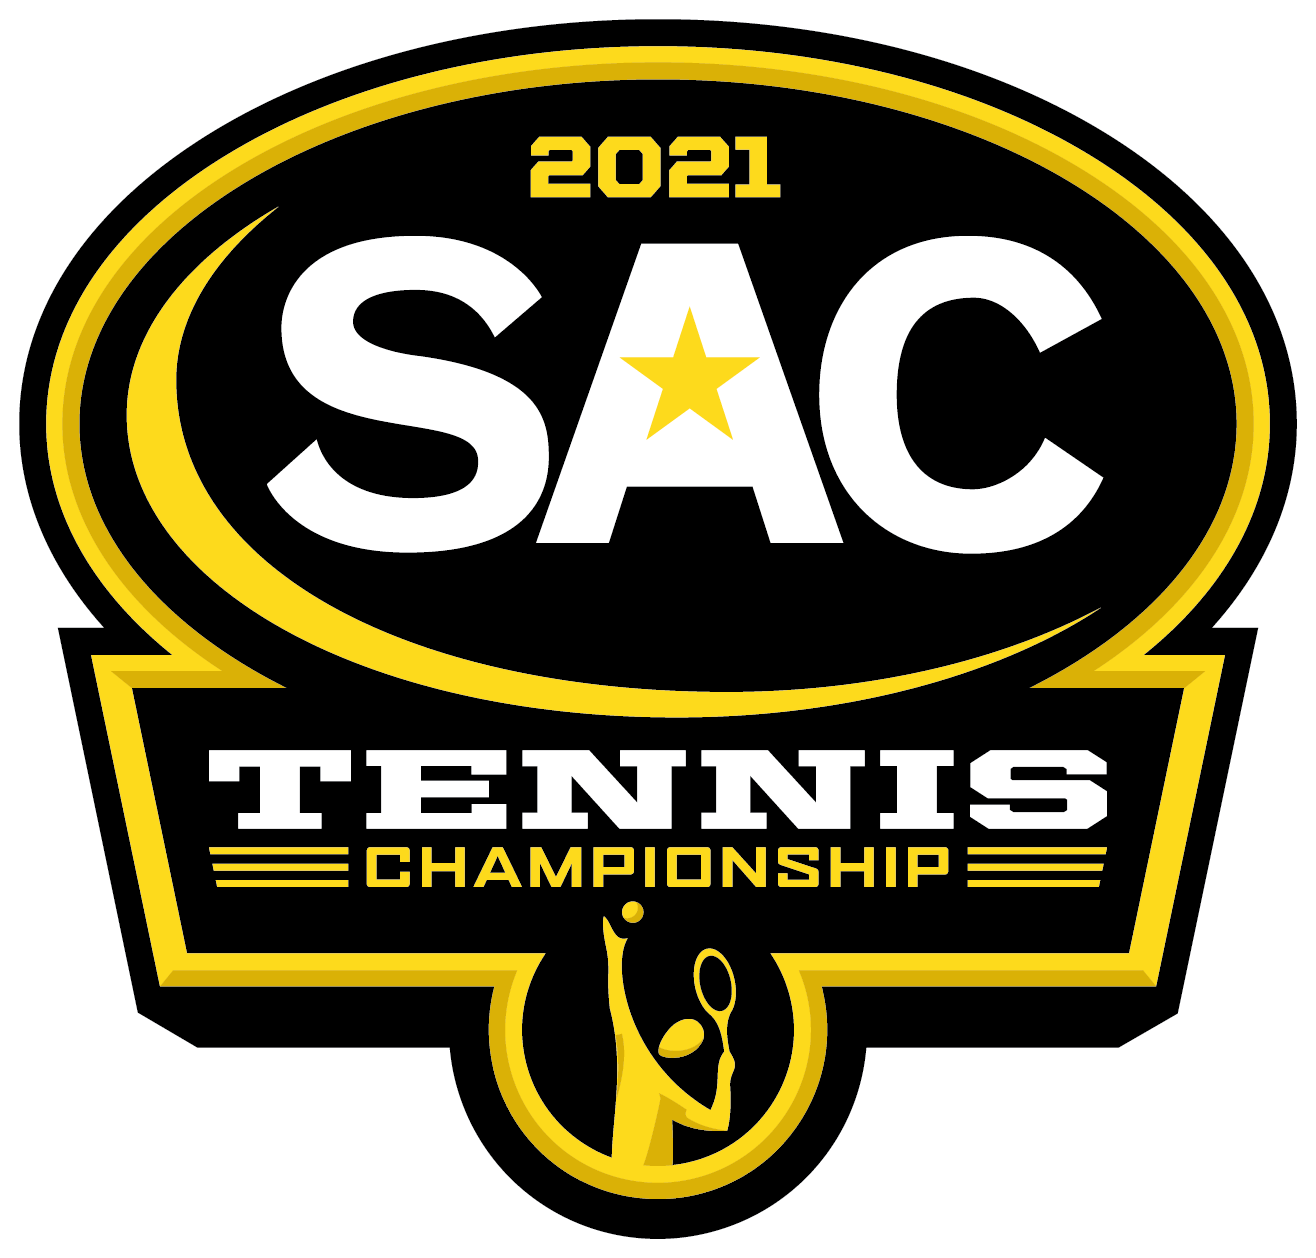 South Atlantic Conference